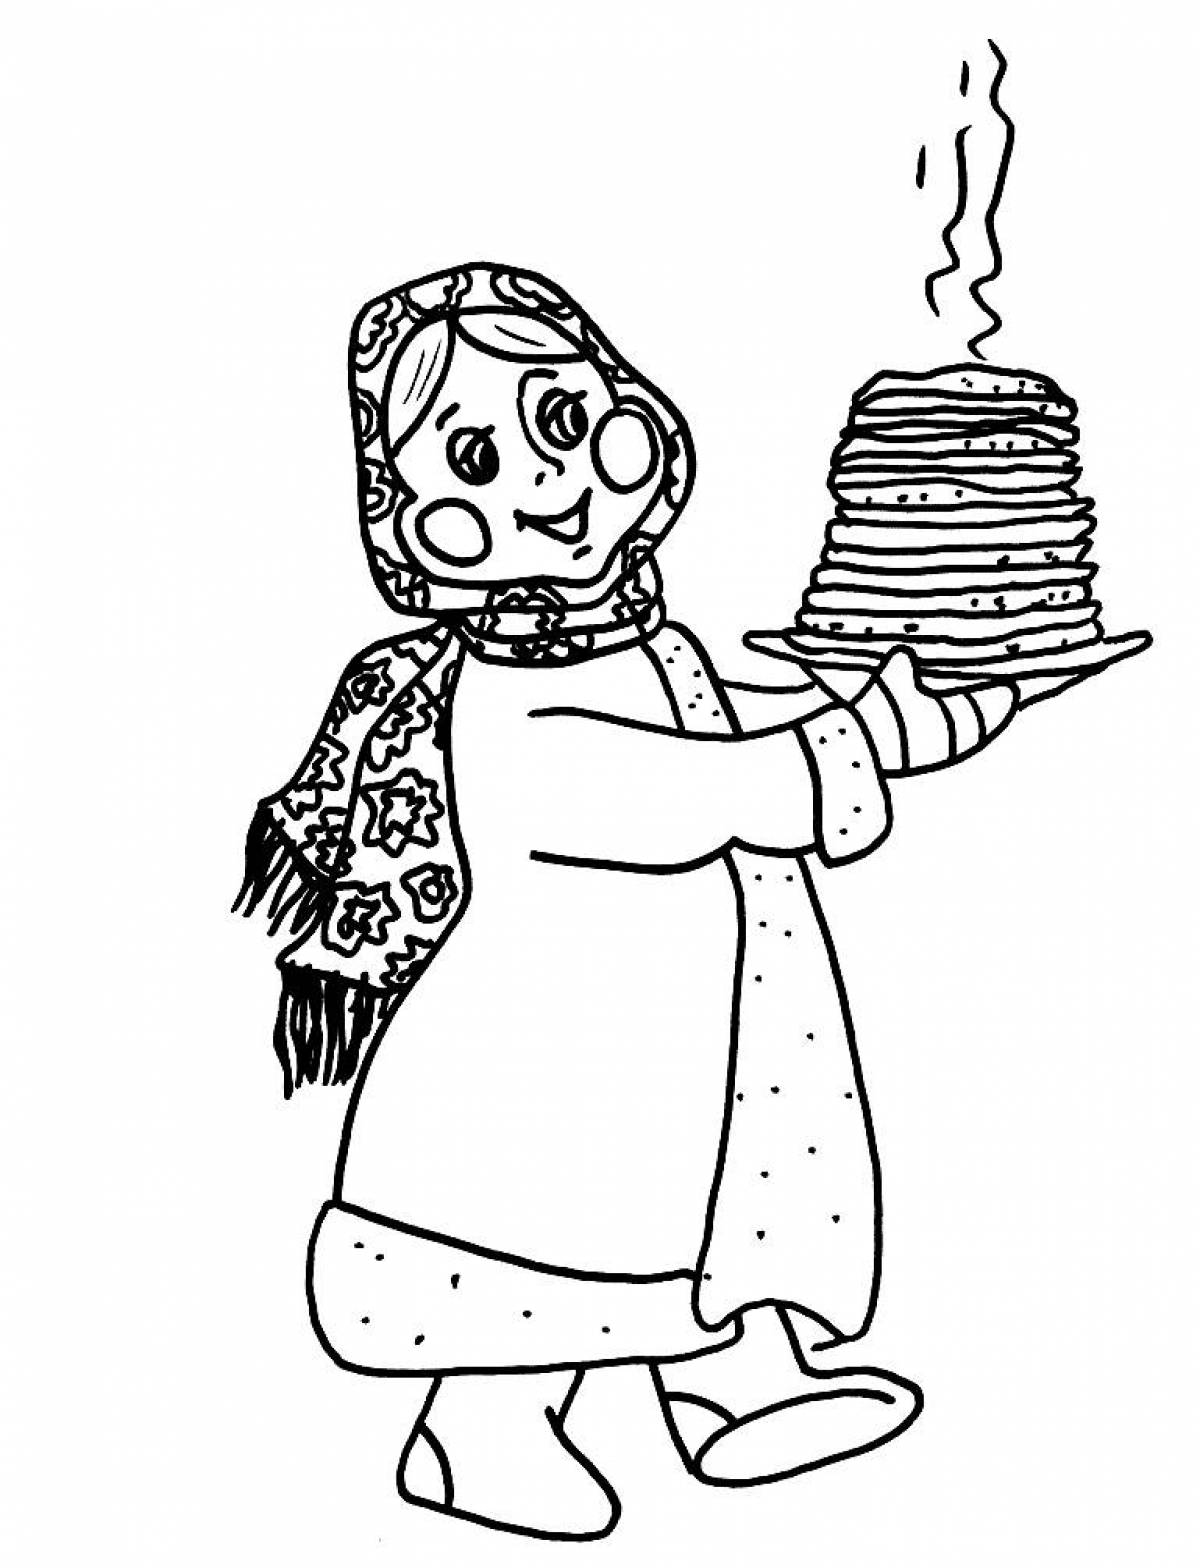 Woman with pancakes